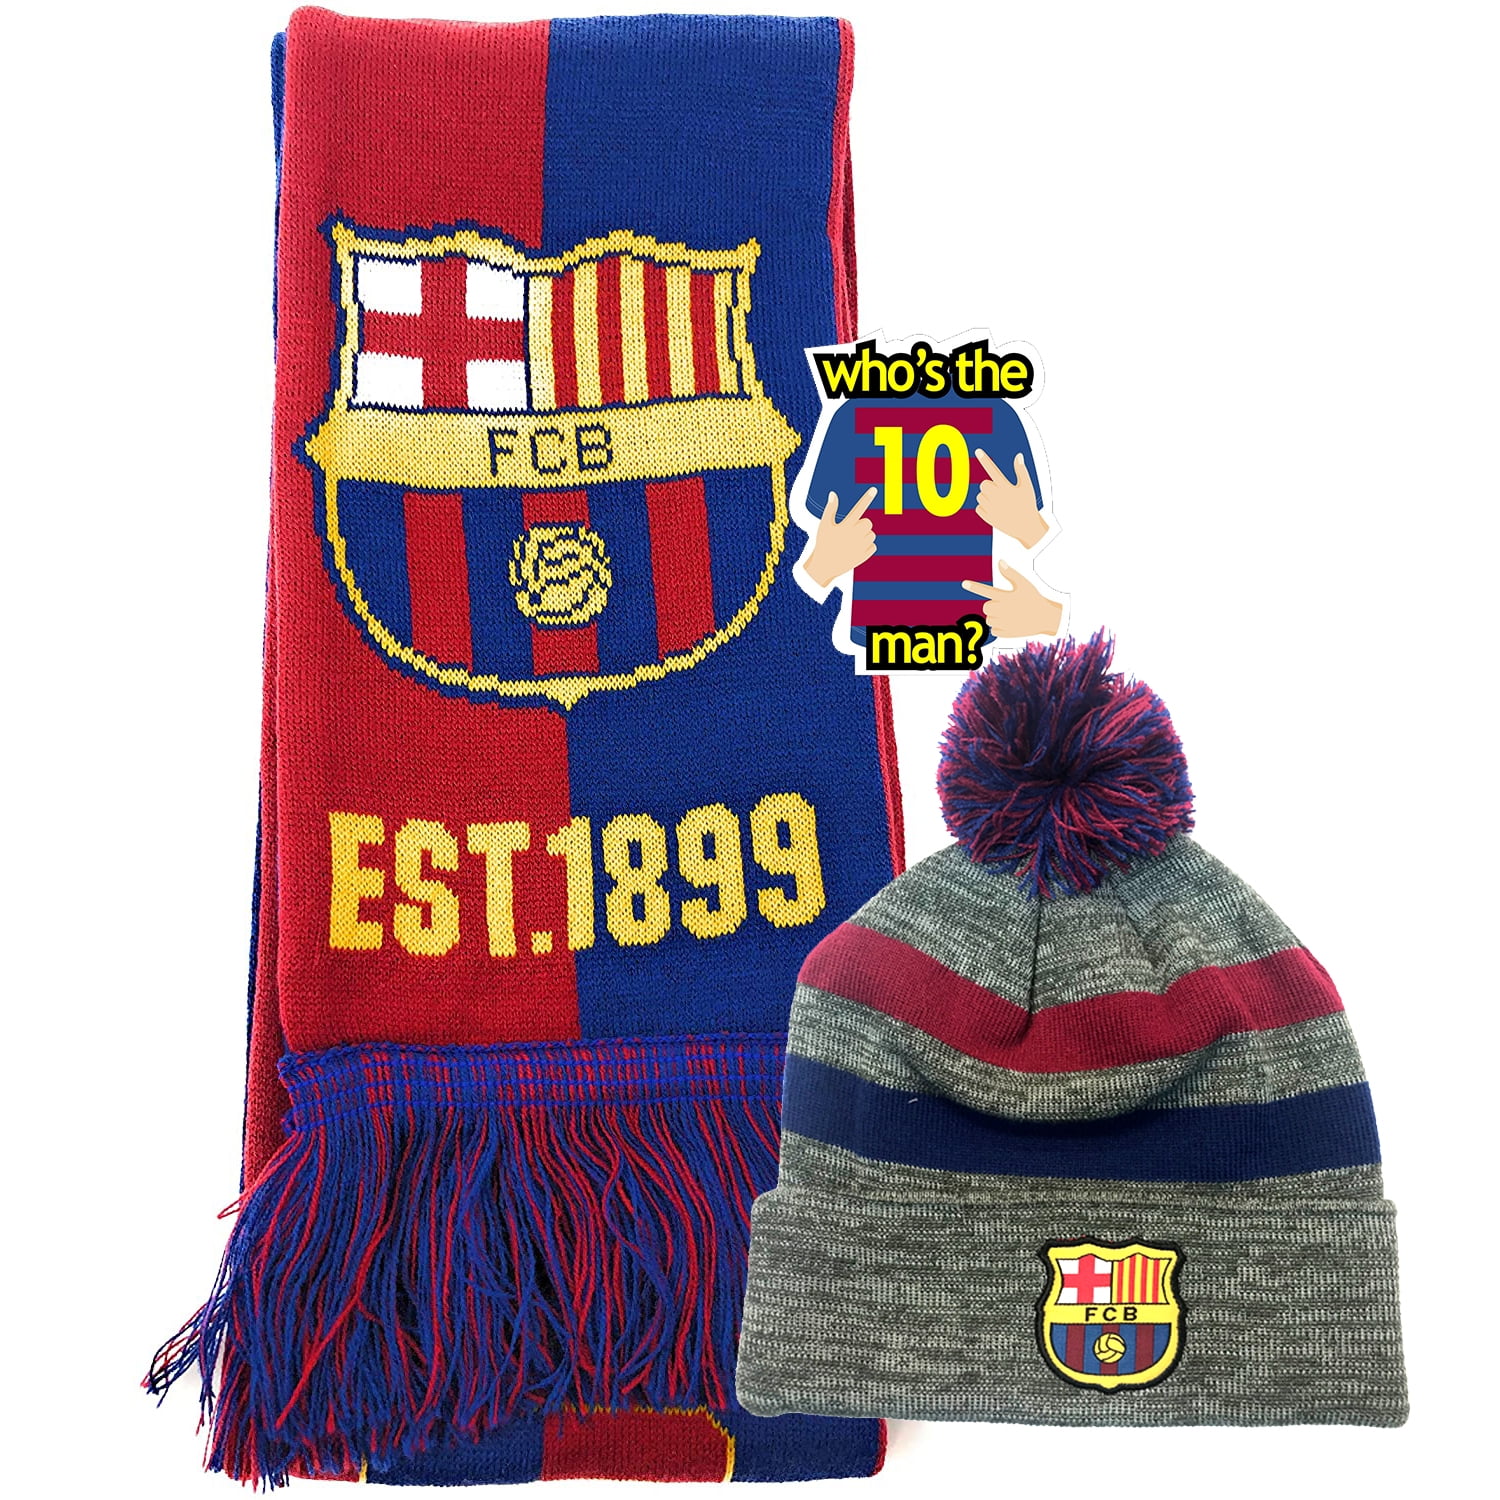 FC BARCELONA FOOTBALL CLUB CREST KNITTED ADULT HAND GLOVES  NEW XMAS GIFT 